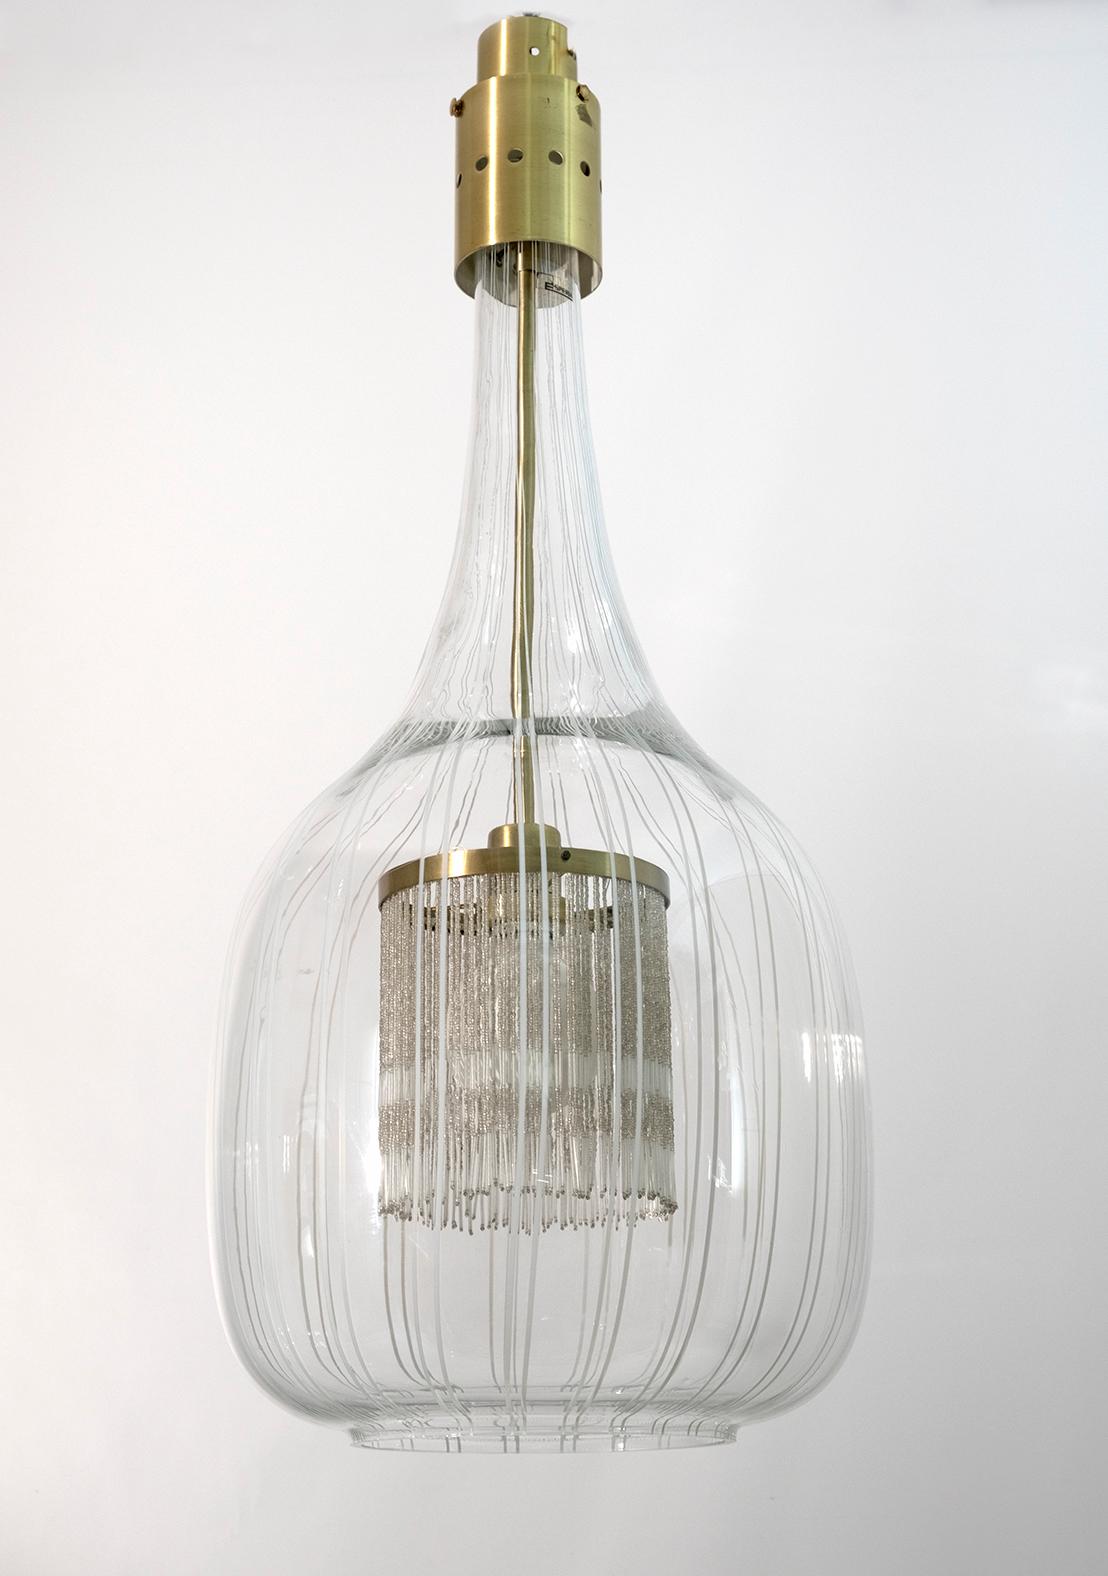 Angelo Brotto for Esperia, pendant lamp, glass, brass, Italy, 1970s

Angelo Brotto's design is elegant in every sense. A glass latern decorated with vertical lines hangs on a brass fixation. Mouth-blown Murano glass shows true craftsmanship. On a